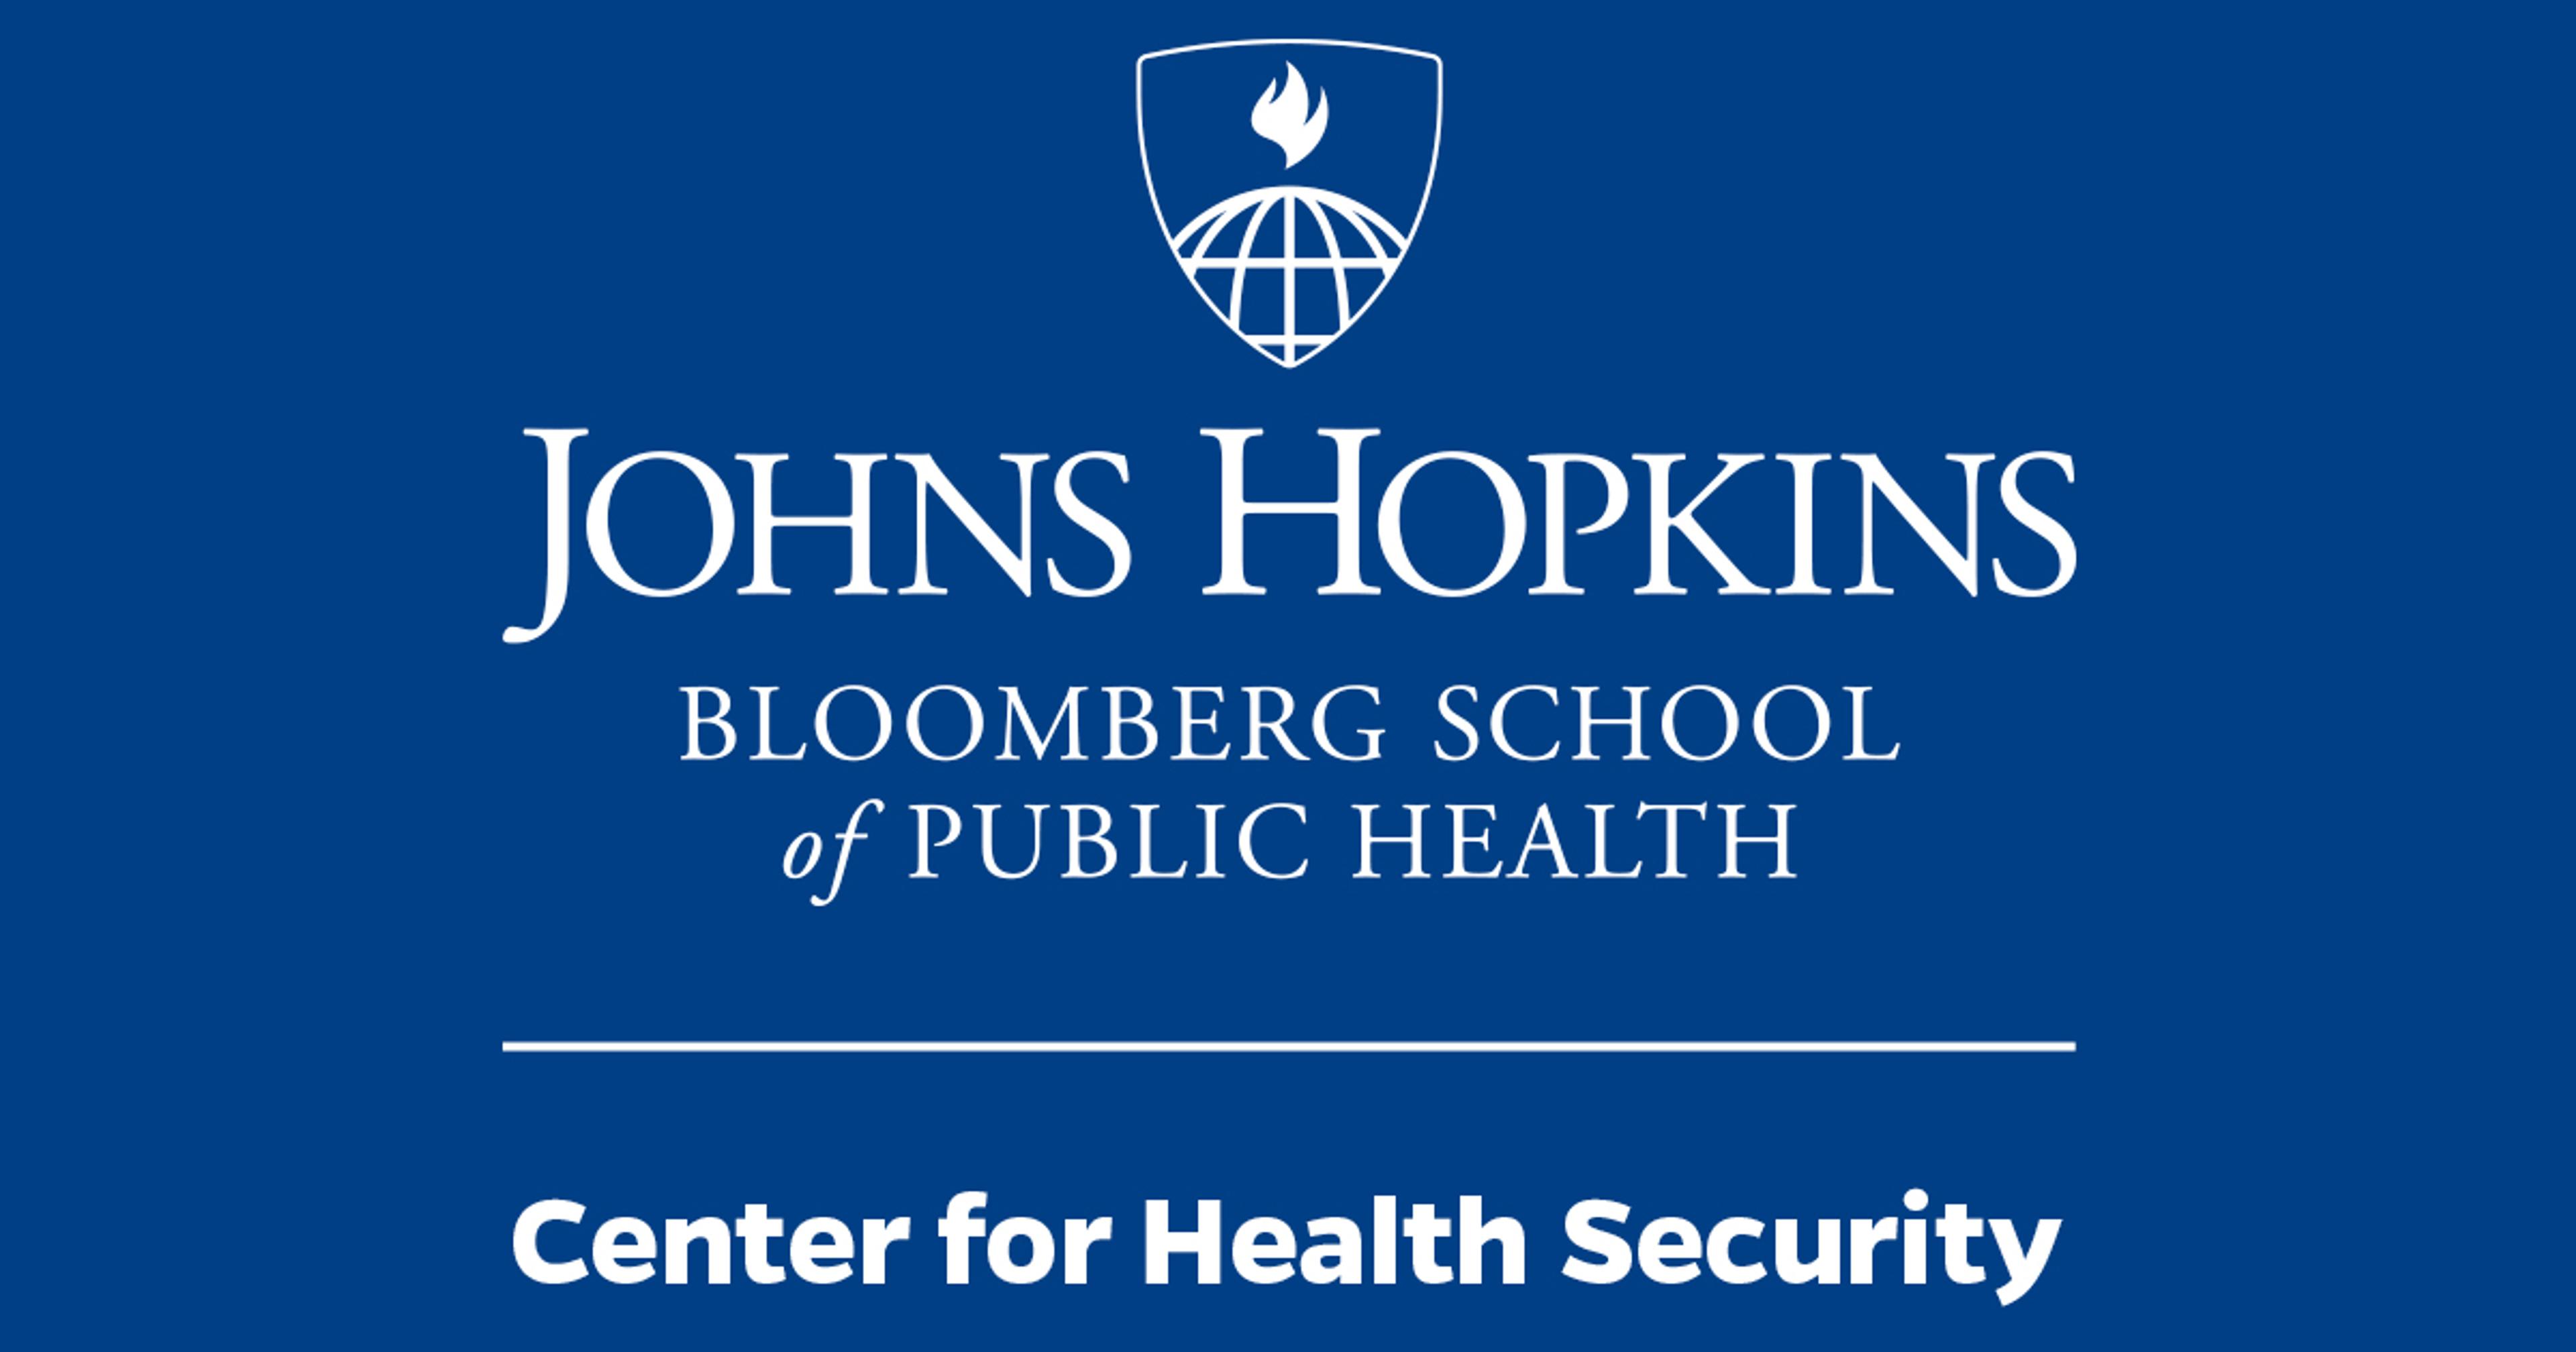 The Johns Hopkins Center for Health Security